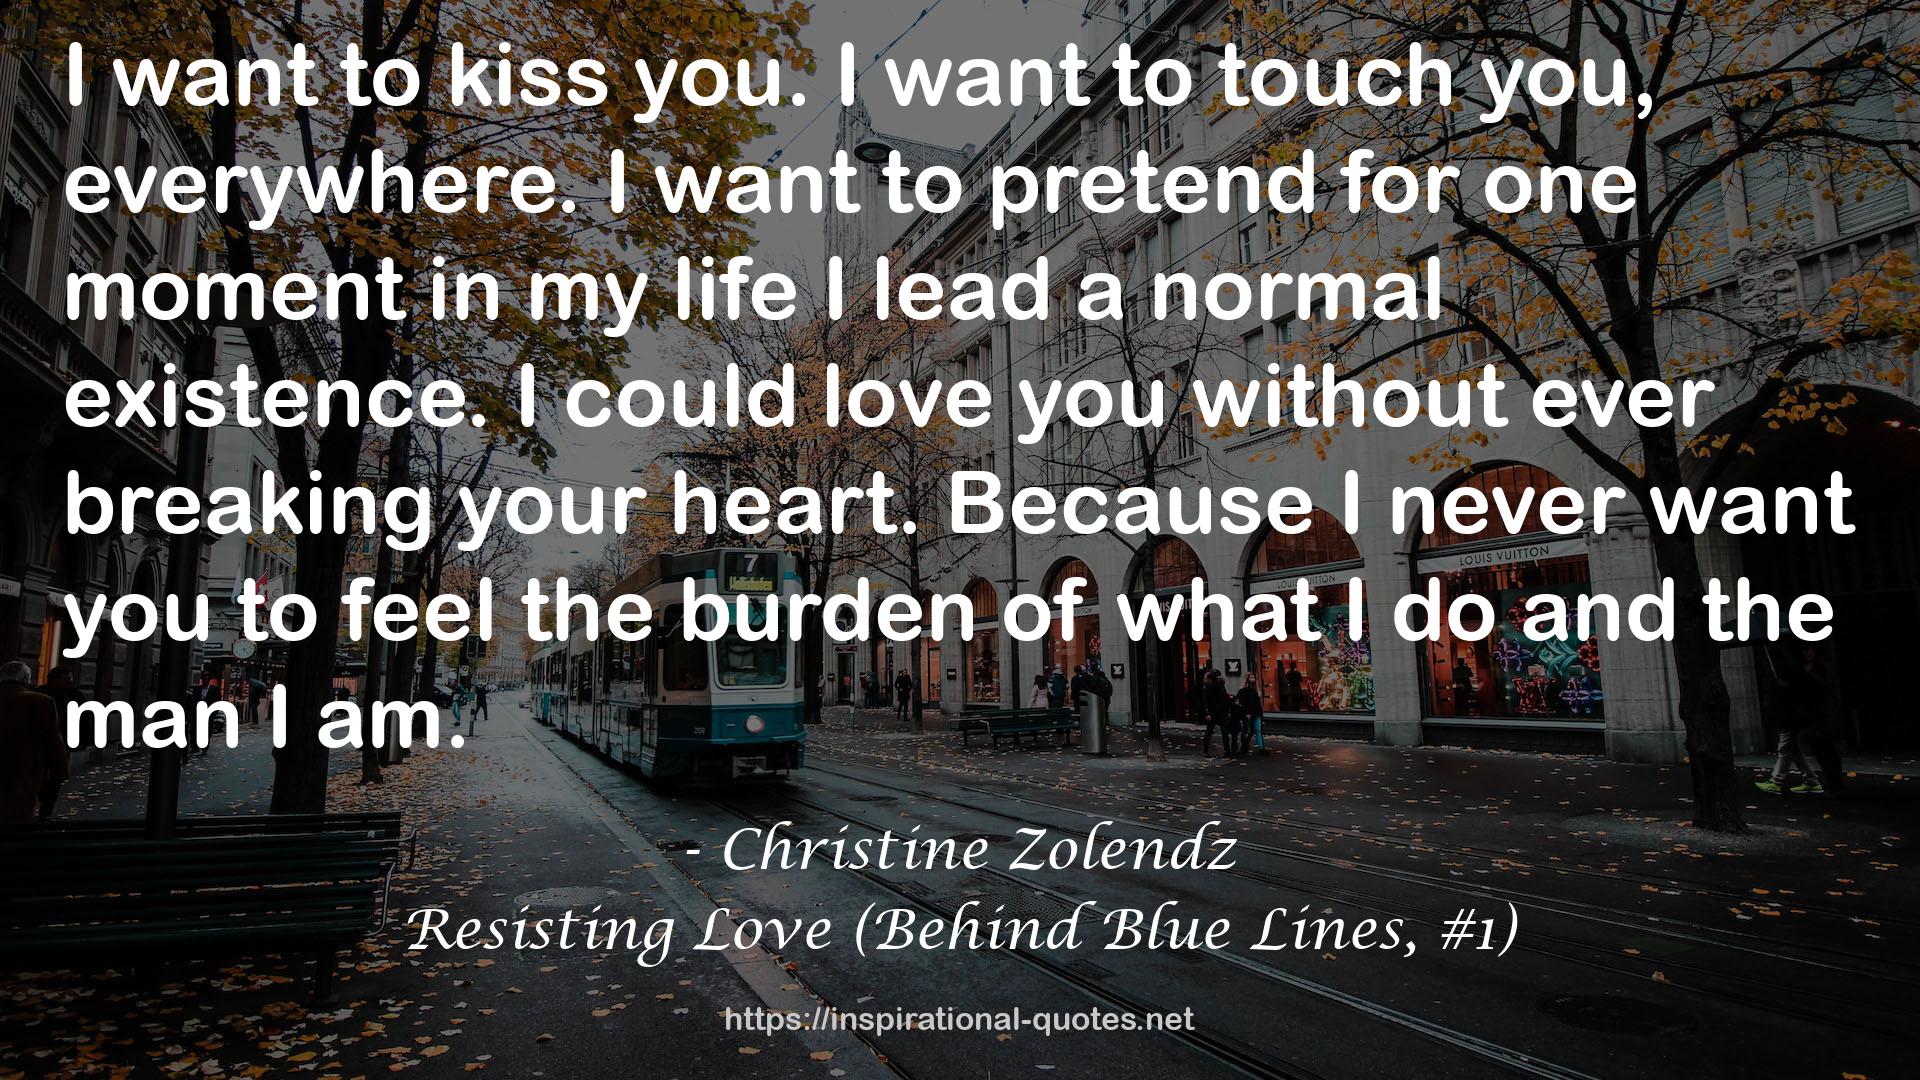 Resisting Love (Behind Blue Lines, #1) QUOTES